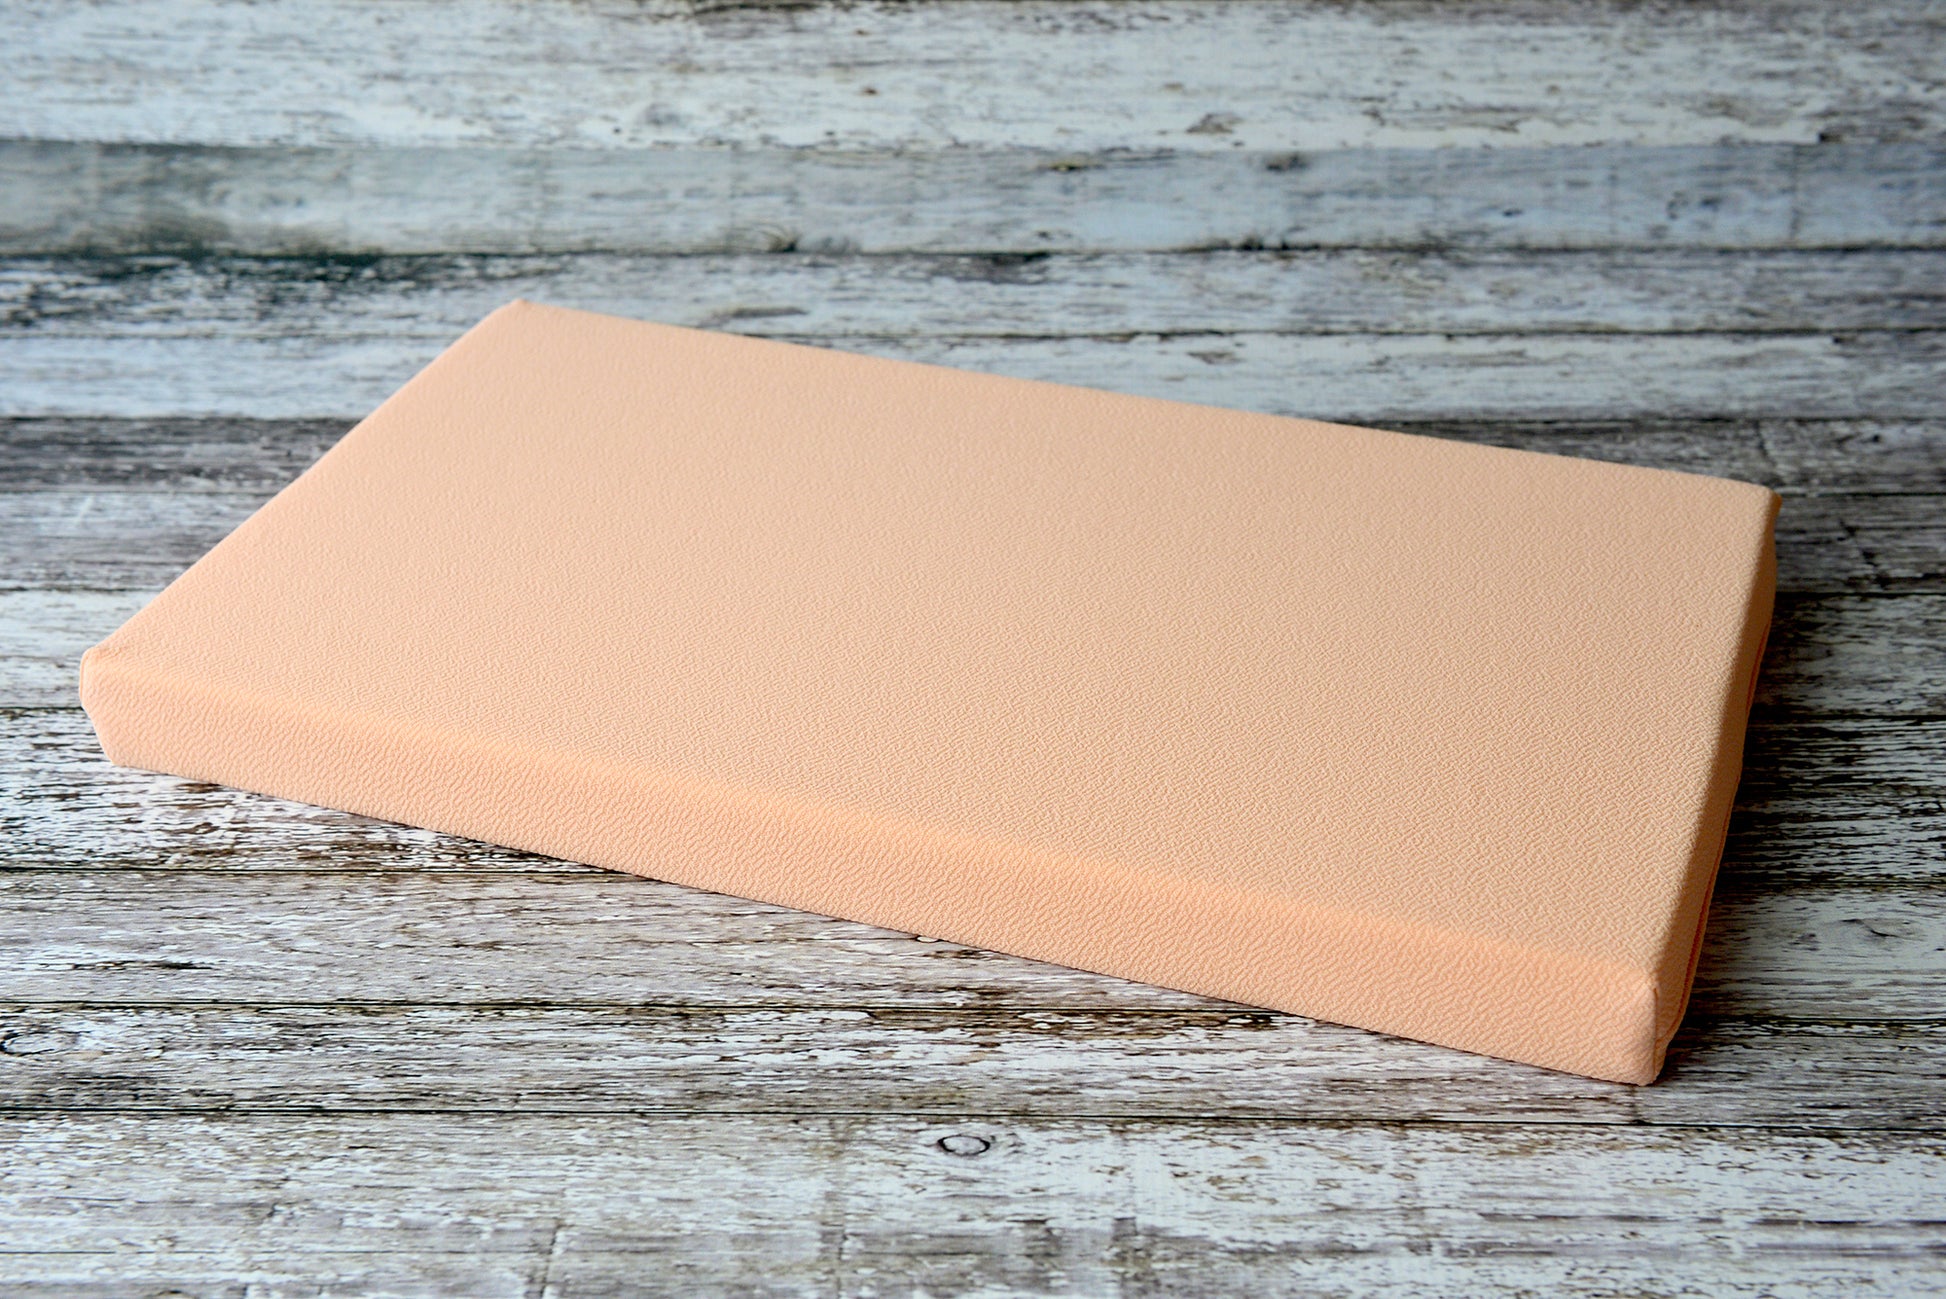 Mattress with Cover - Textured - Peach-Newborn Photography Props